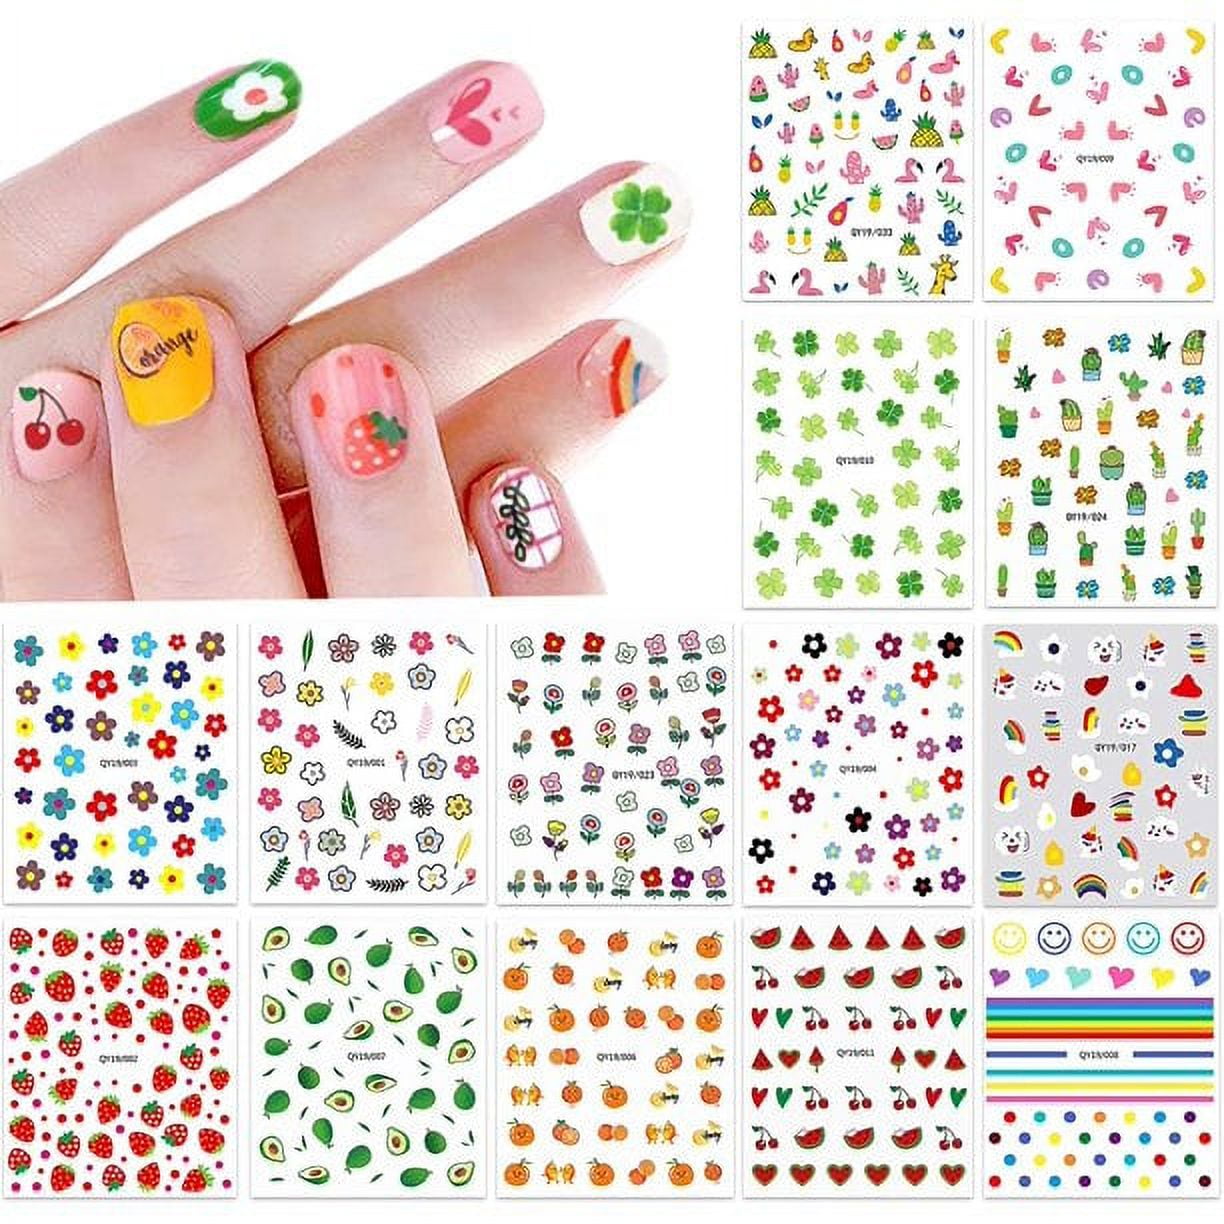 Nishi 1000pcs 3D Fruit Slices Nail Art Decoration 5mm Polymer Clay Stickers  - Price in India, Buy Nishi 1000pcs 3D Fruit Slices Nail Art Decoration 5mm  Polymer Clay Stickers Online In India,